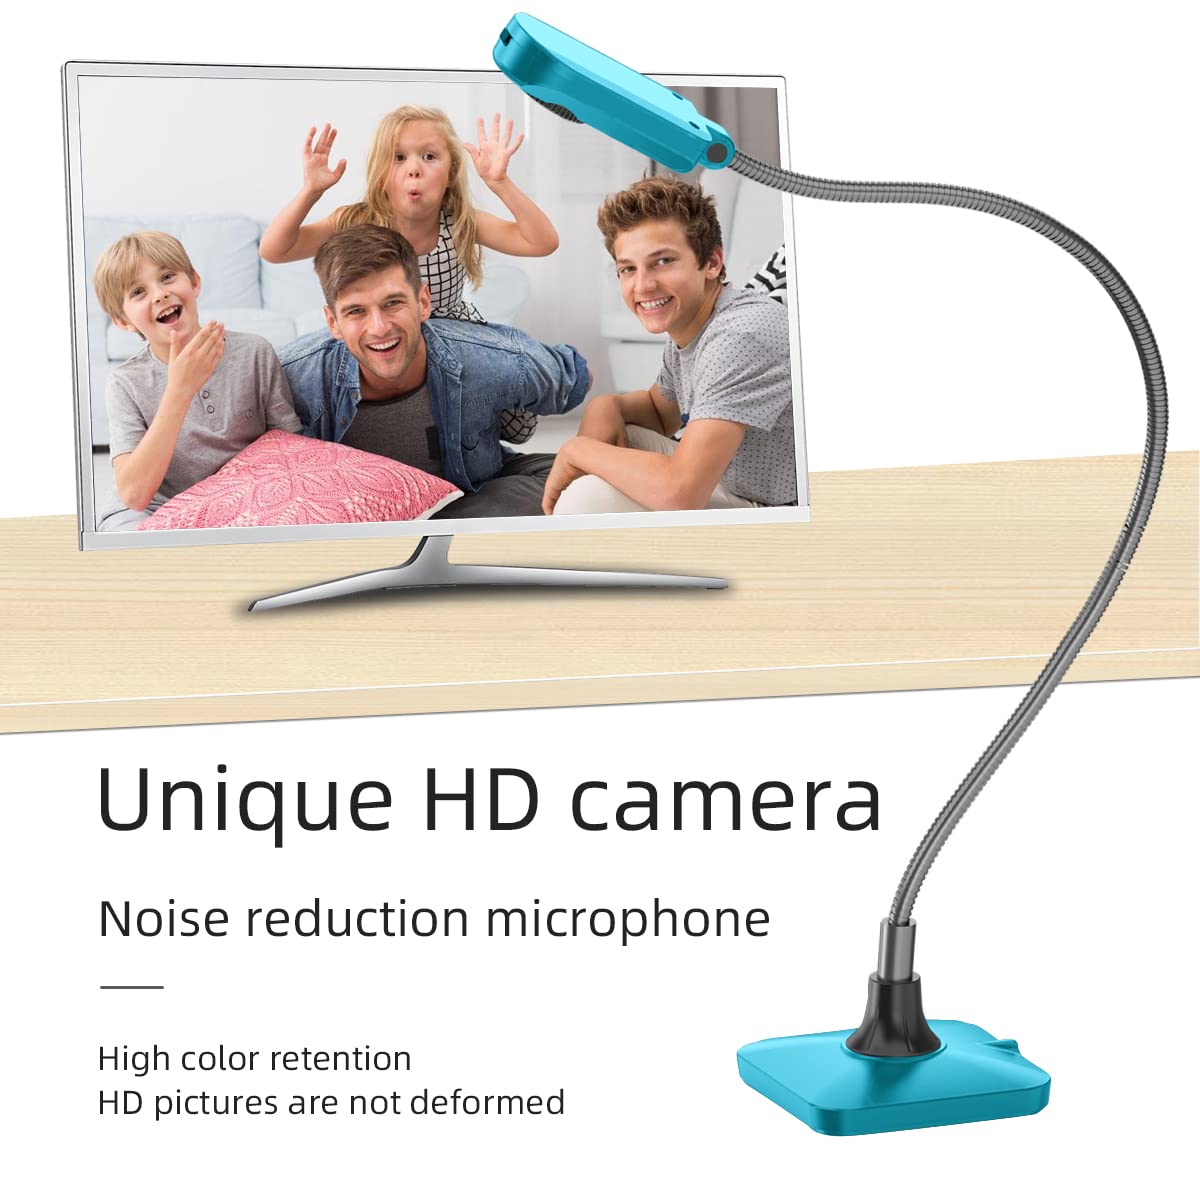 ZSEEWCAM Document Camera (Blue) Ultra High Definition 5MP USB Document Camera — Mac OS, Windows, Chromebook Compatible for Live Demo, Web Conferencing, Distance Learning, Remote Teaching,Scanner